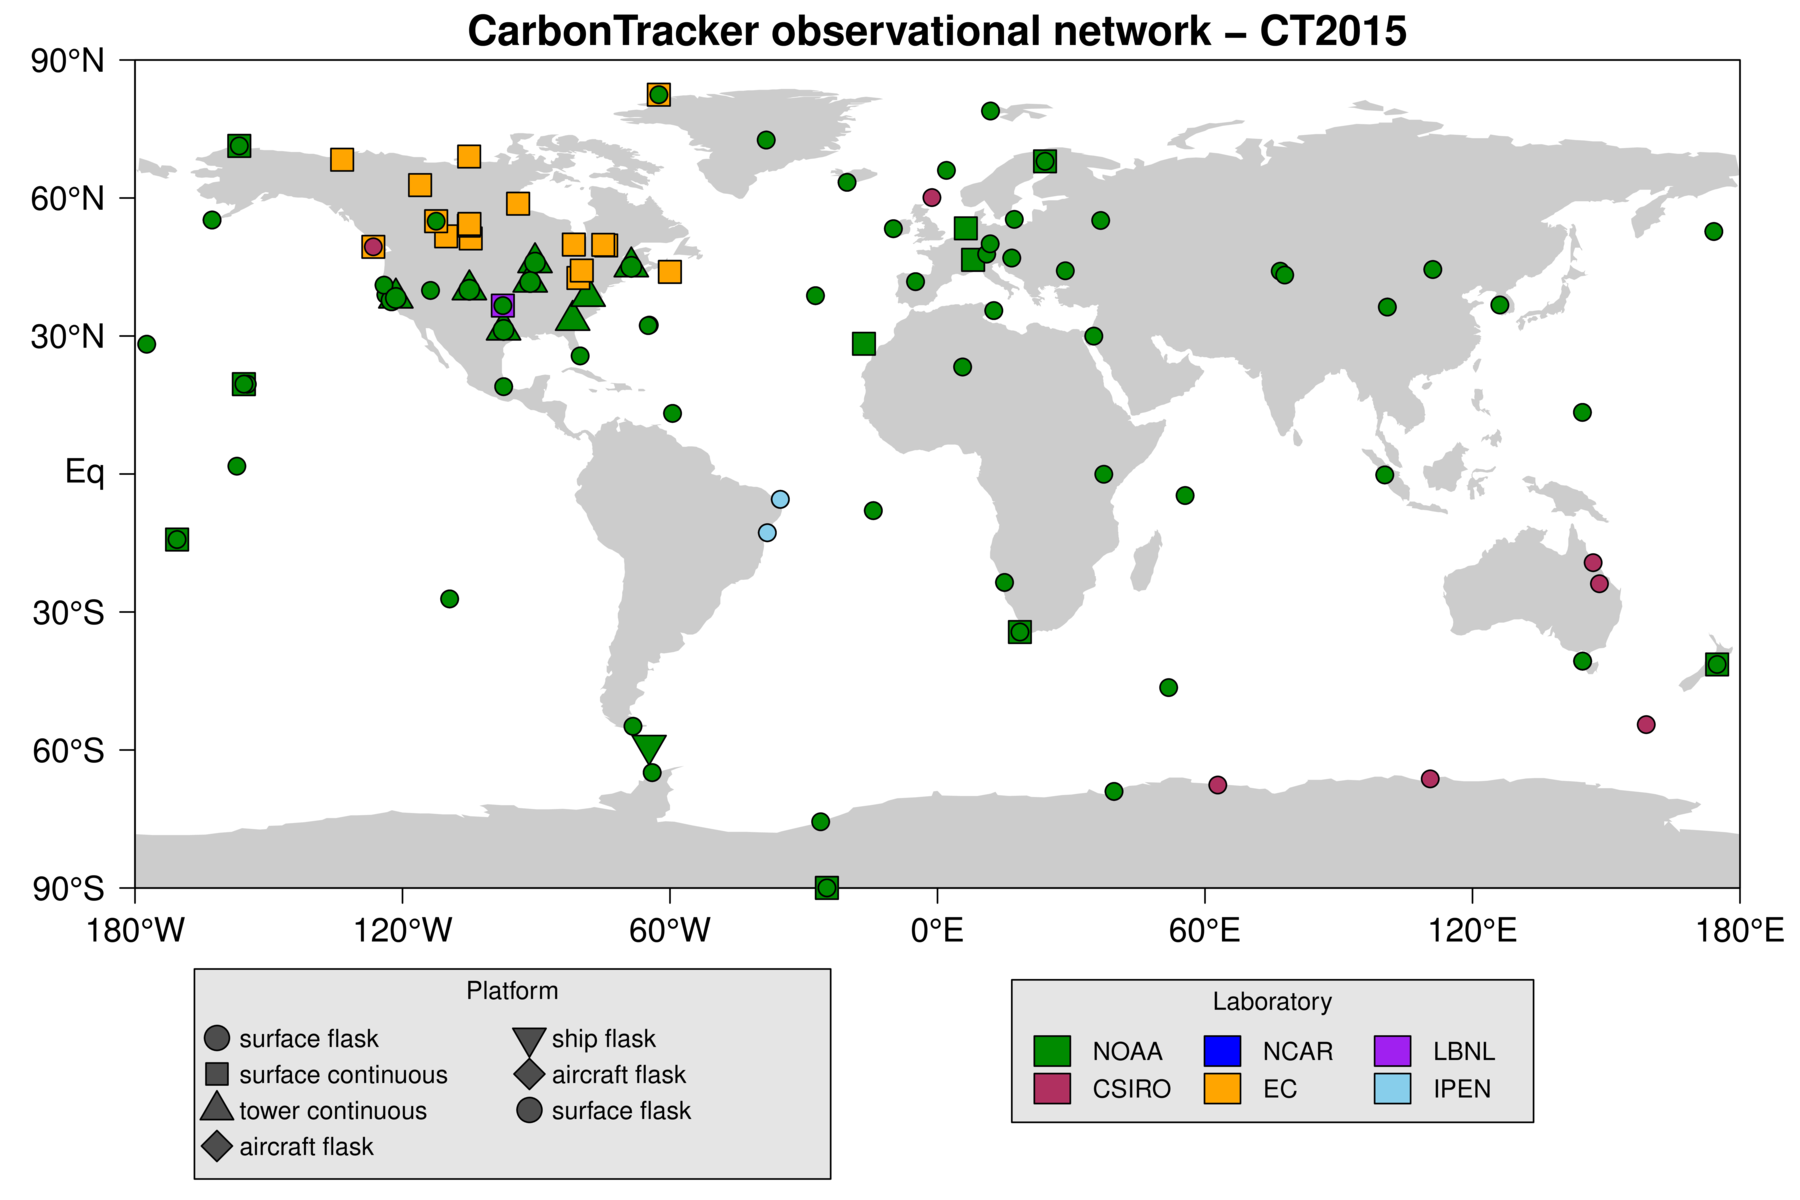 /webdata/ccgg/CT2015/summary/network-global.png